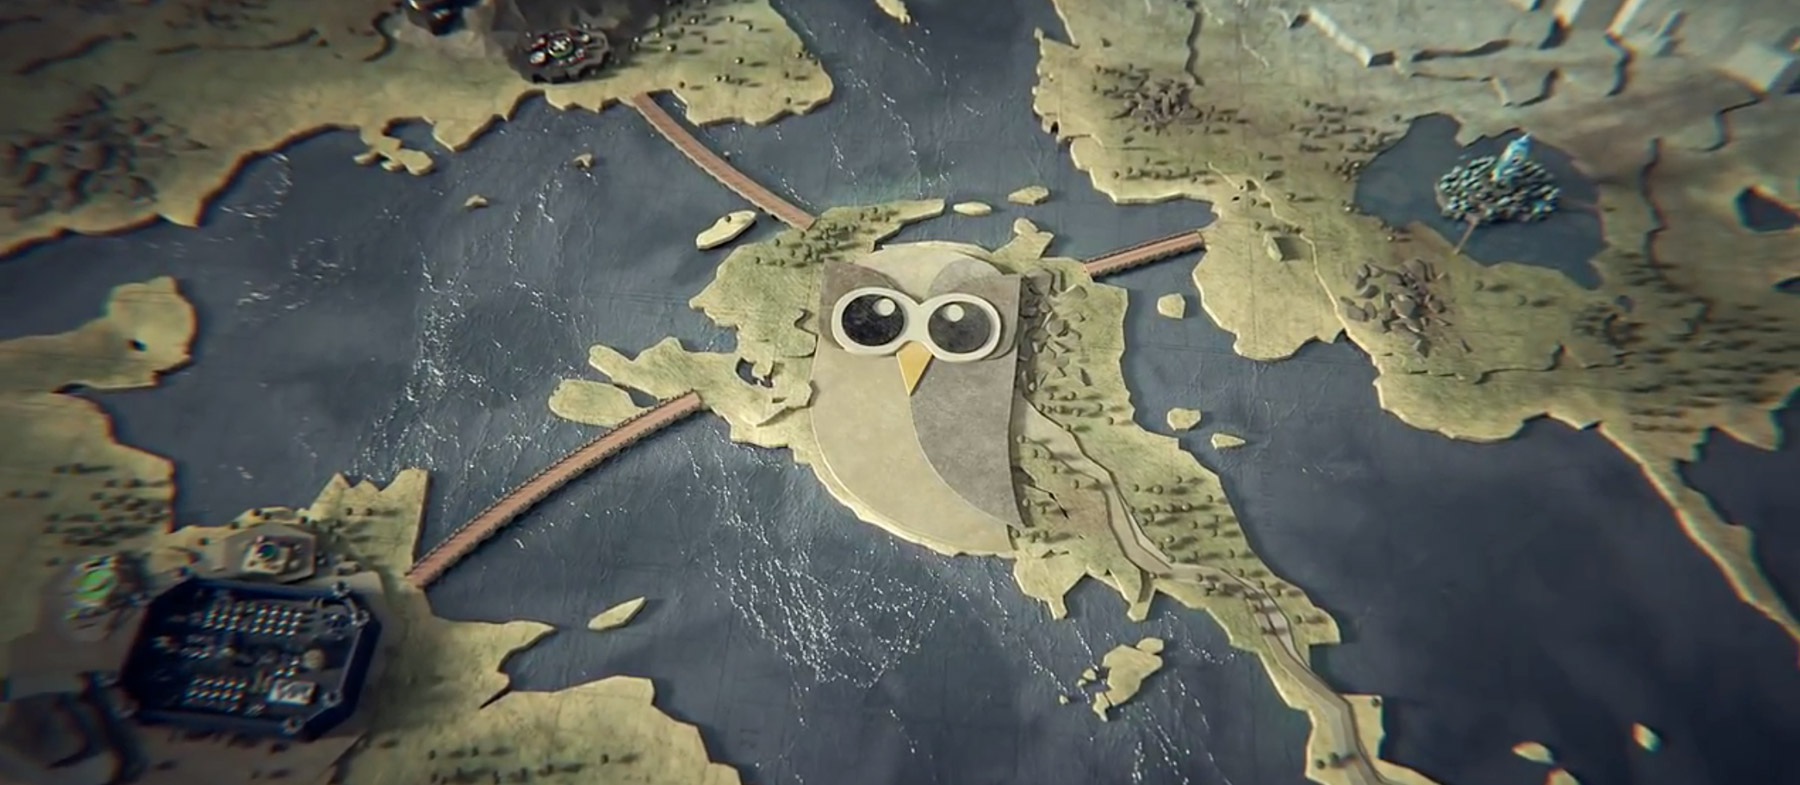 Hootsuite Scores a Real-Time Win With ‘Game of Thrones’ Spoof